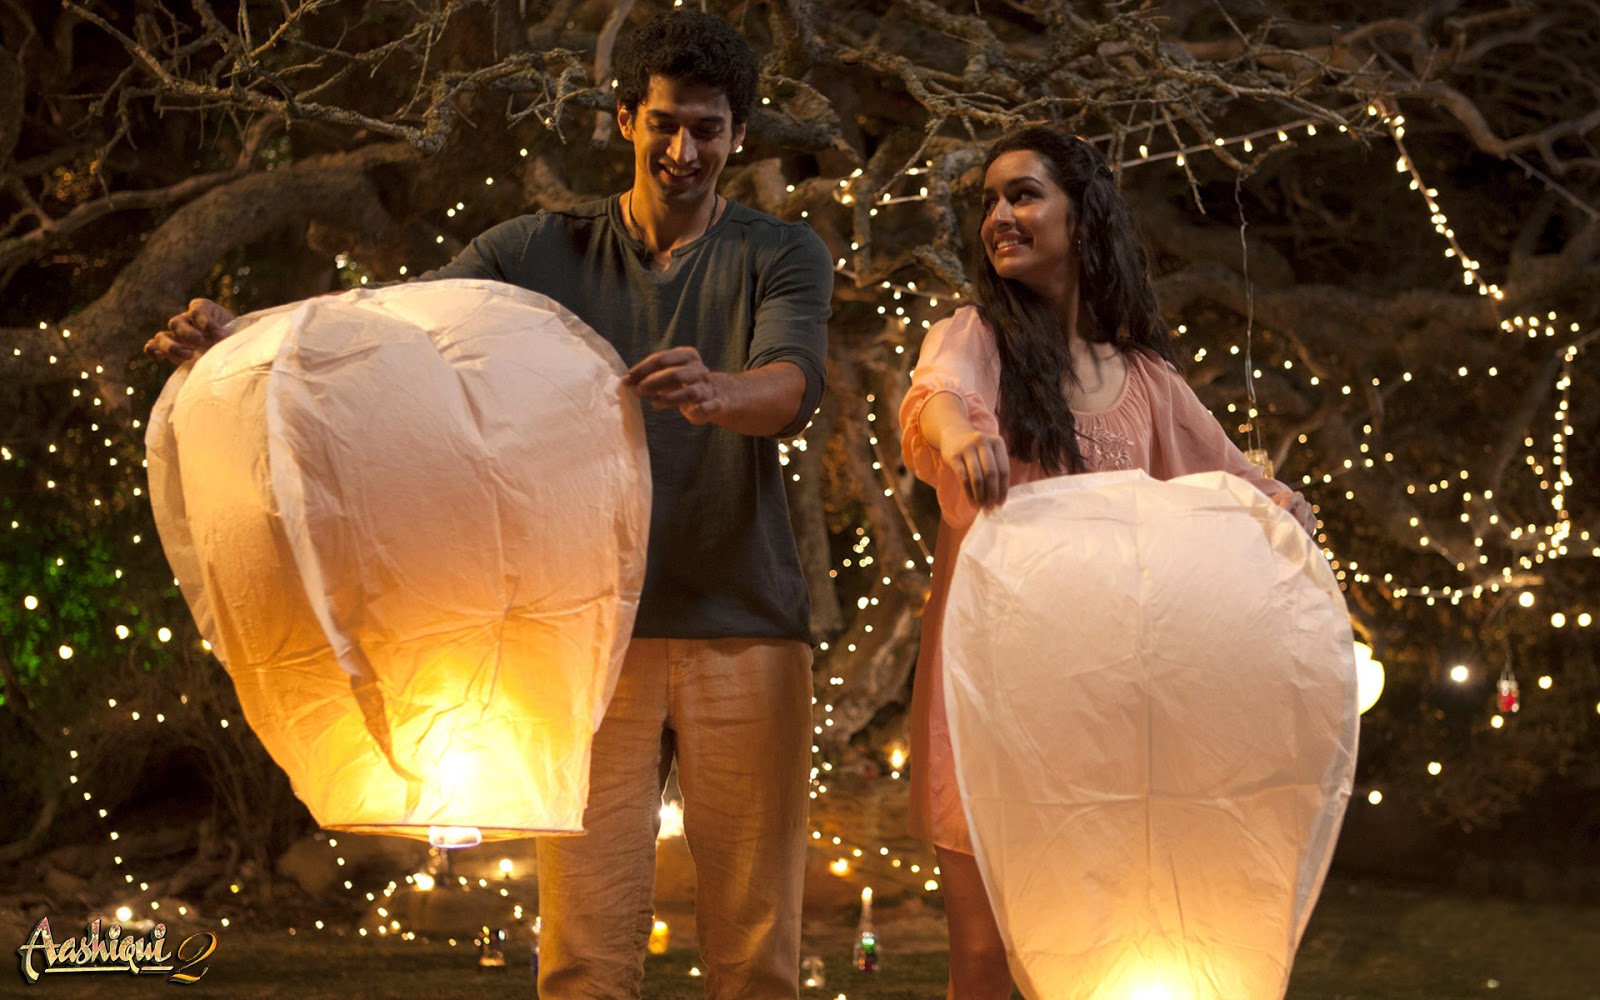 aashiqui 2 movie song mp3